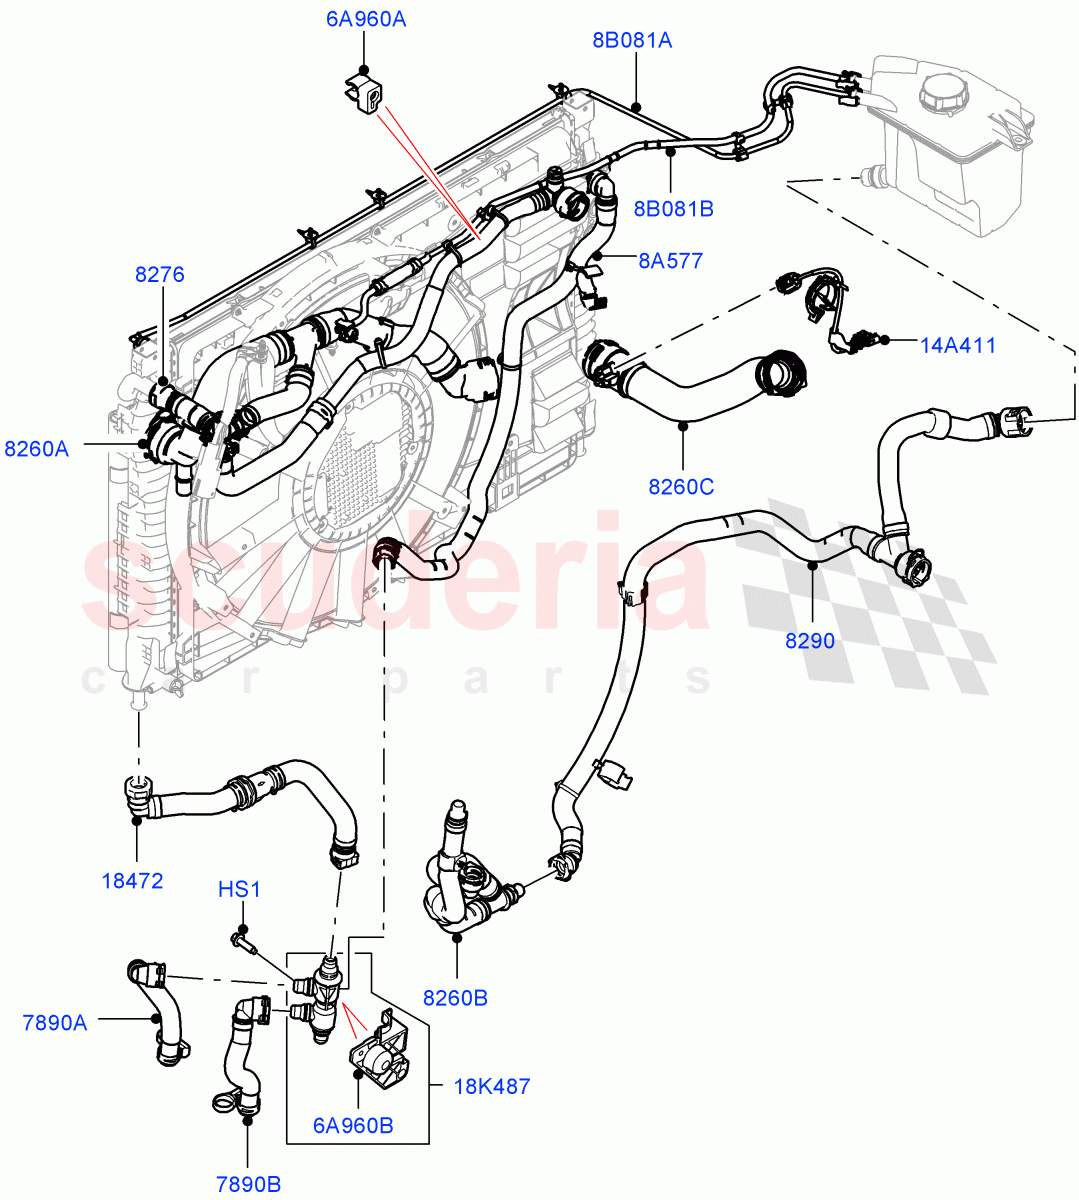 Cooling System Pipes And Hoses(1.5L AJ20P3 Petrol High,Halewood (UK))((V)FROMMH000001) of Land Rover Land Rover Discovery Sport (2015+) [1.5 I3 Turbo Petrol AJ20P3]